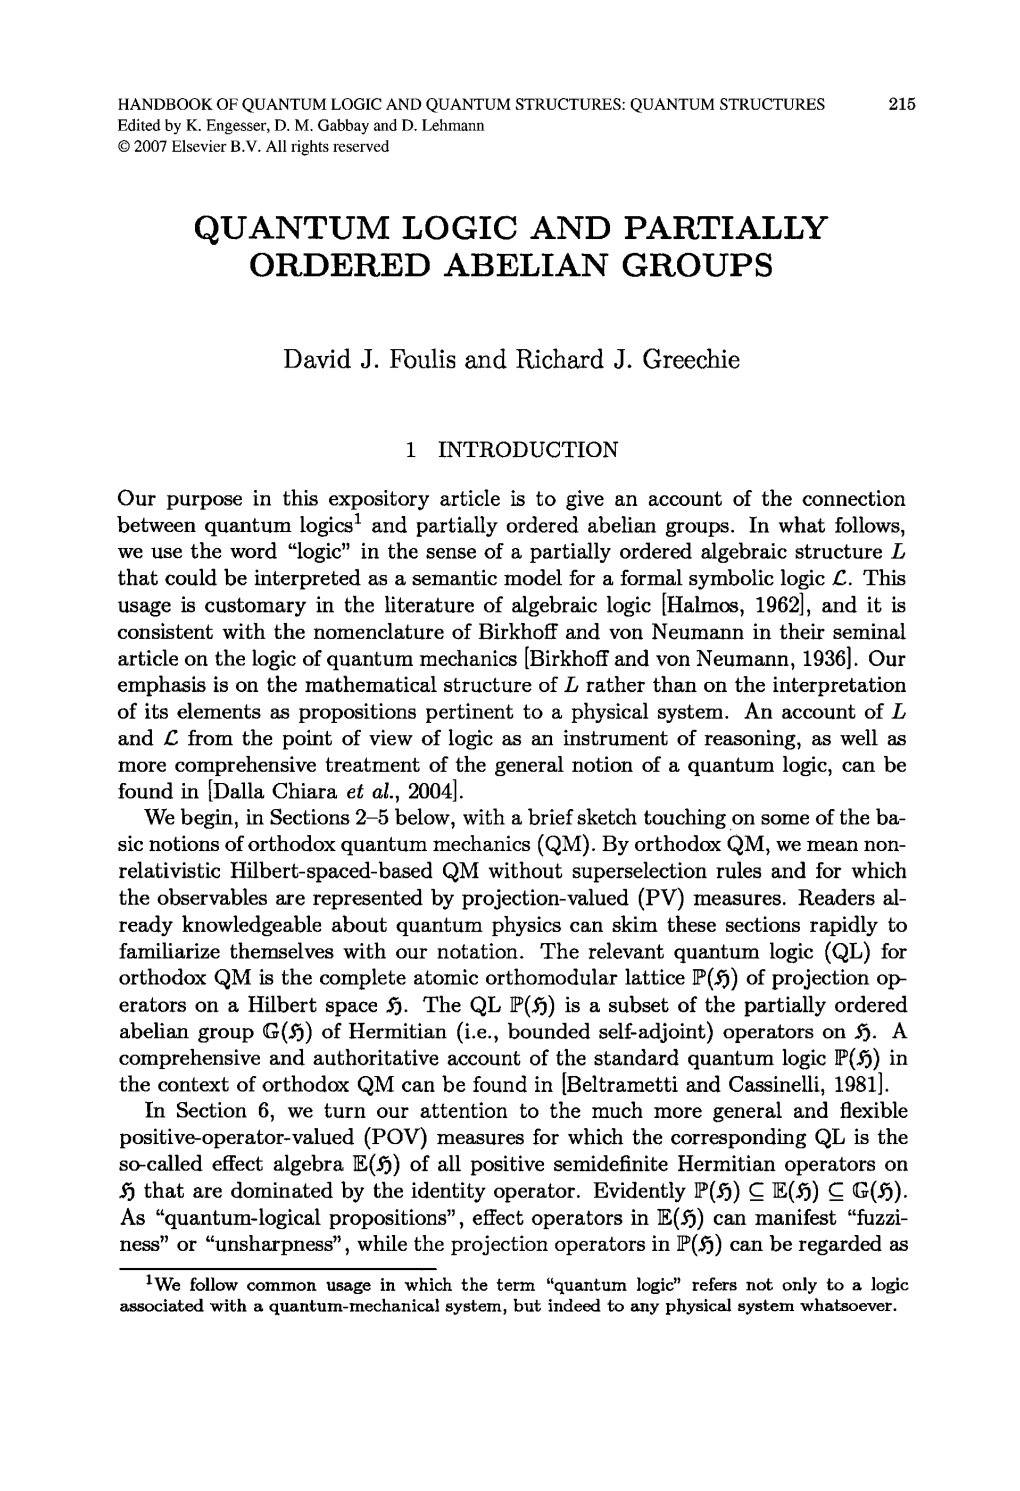 Quantum Logic and Partially Ordered Abelian Groups